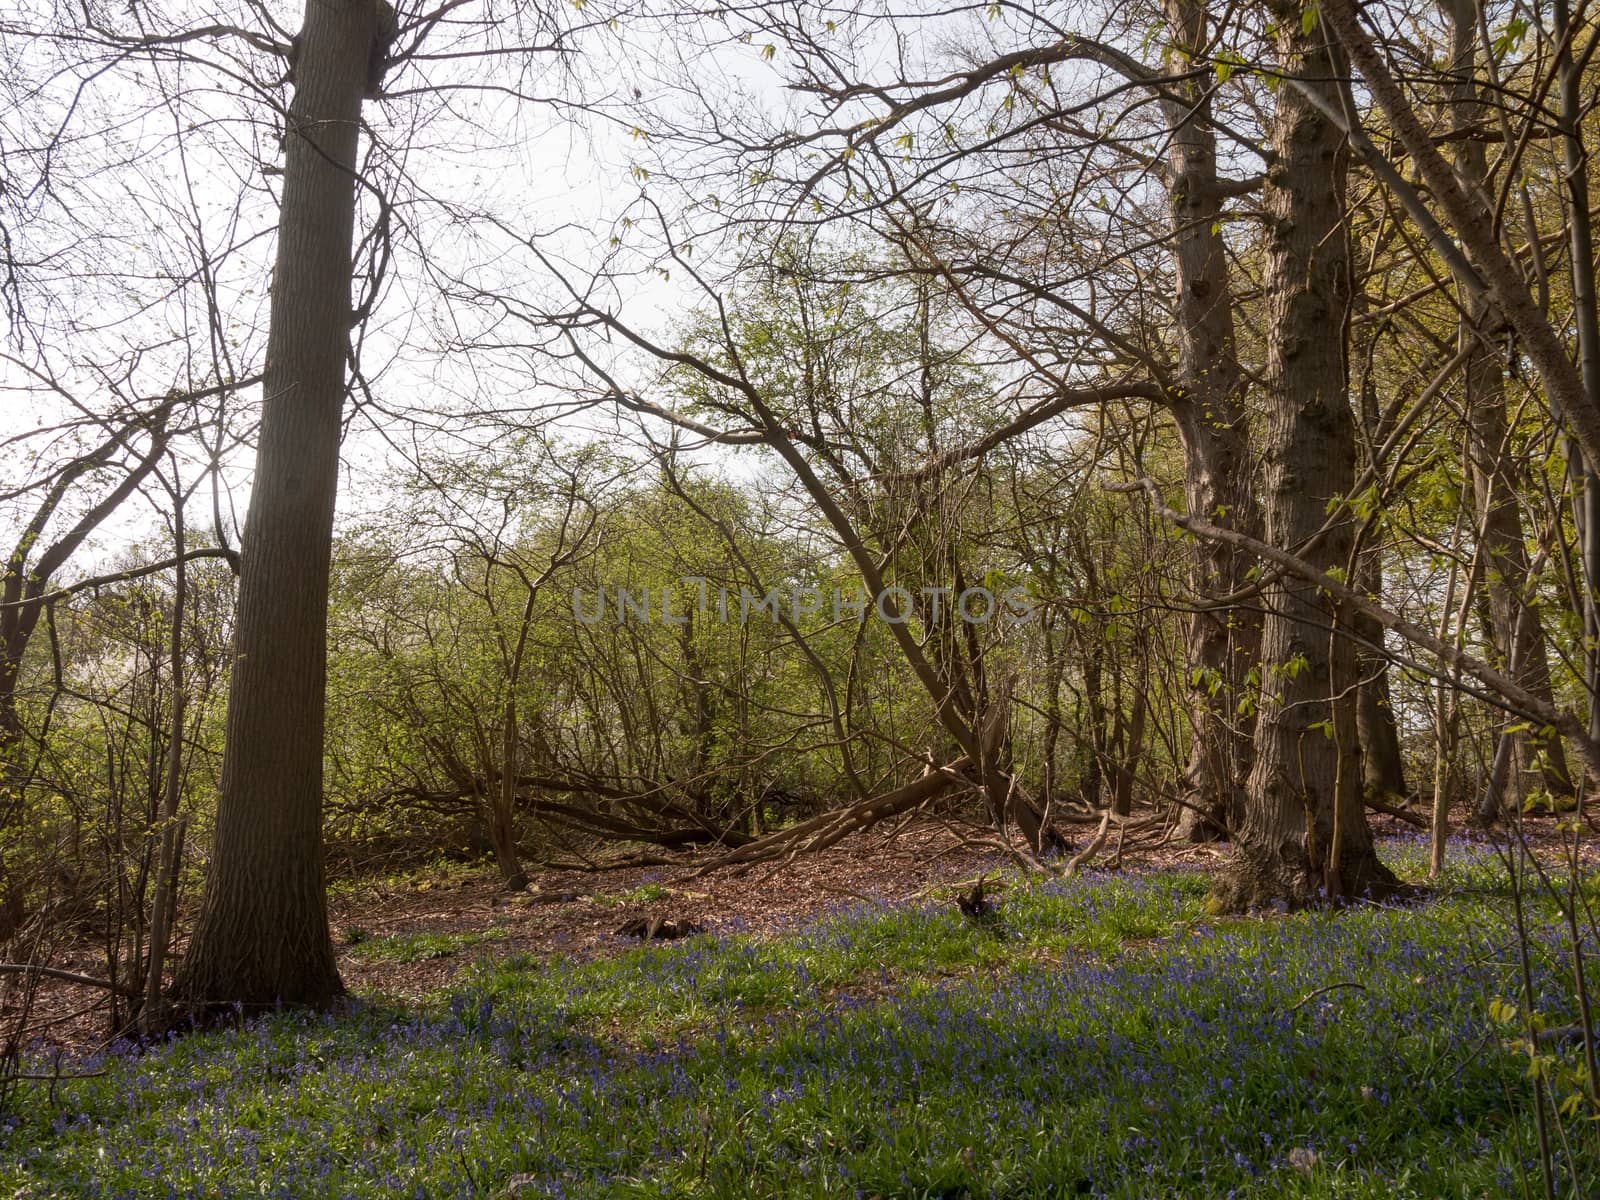 blue bells growing on forest woodland floor UK spring trees nature environment by callumrc